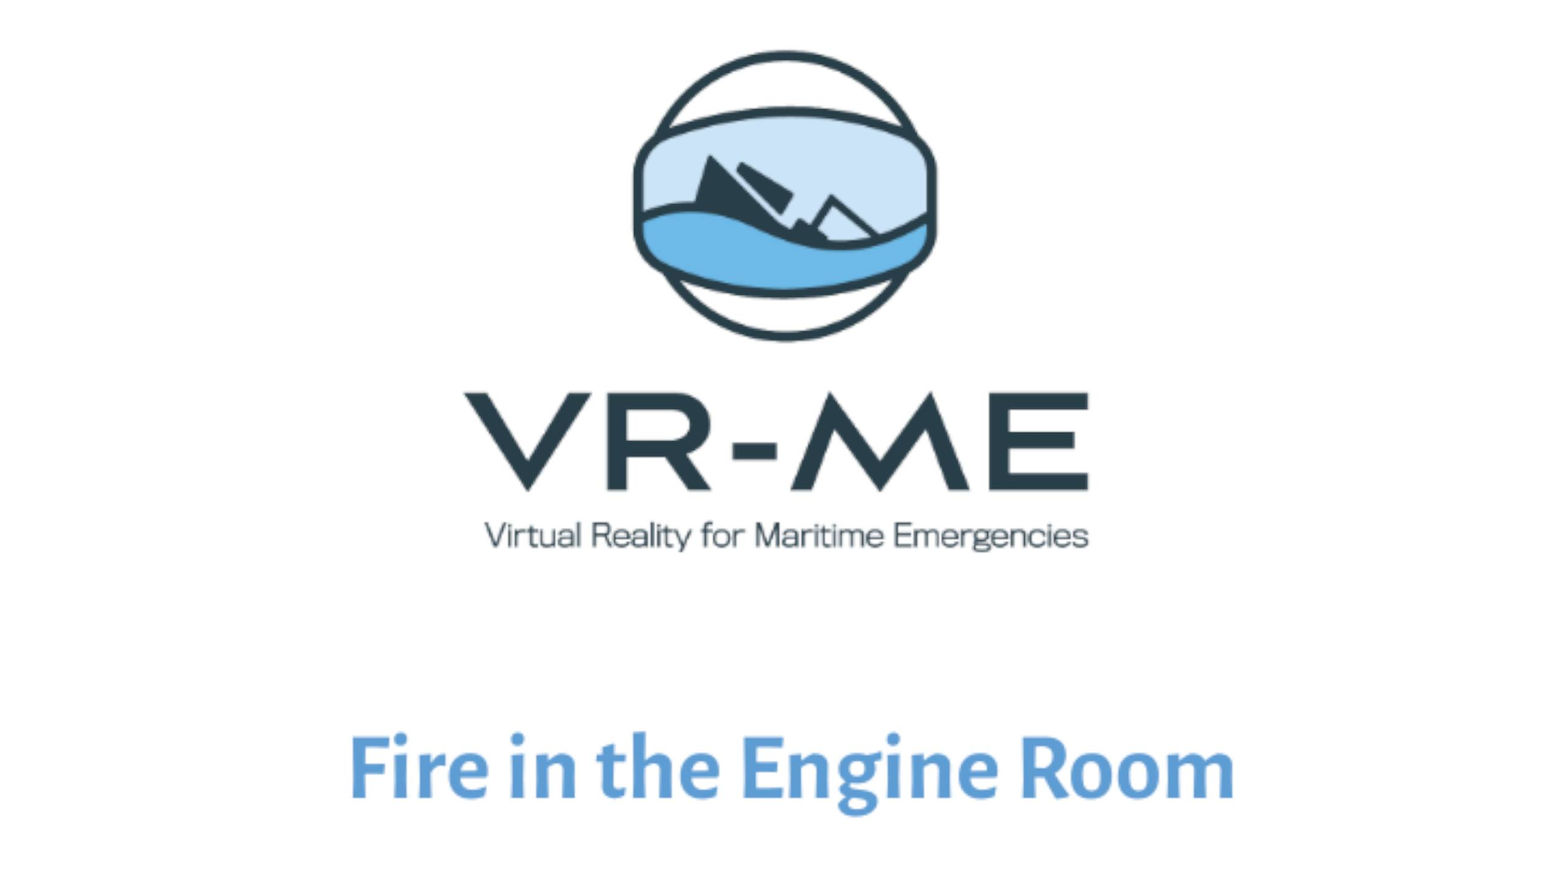 VR-ME: Fire In The Engine Room